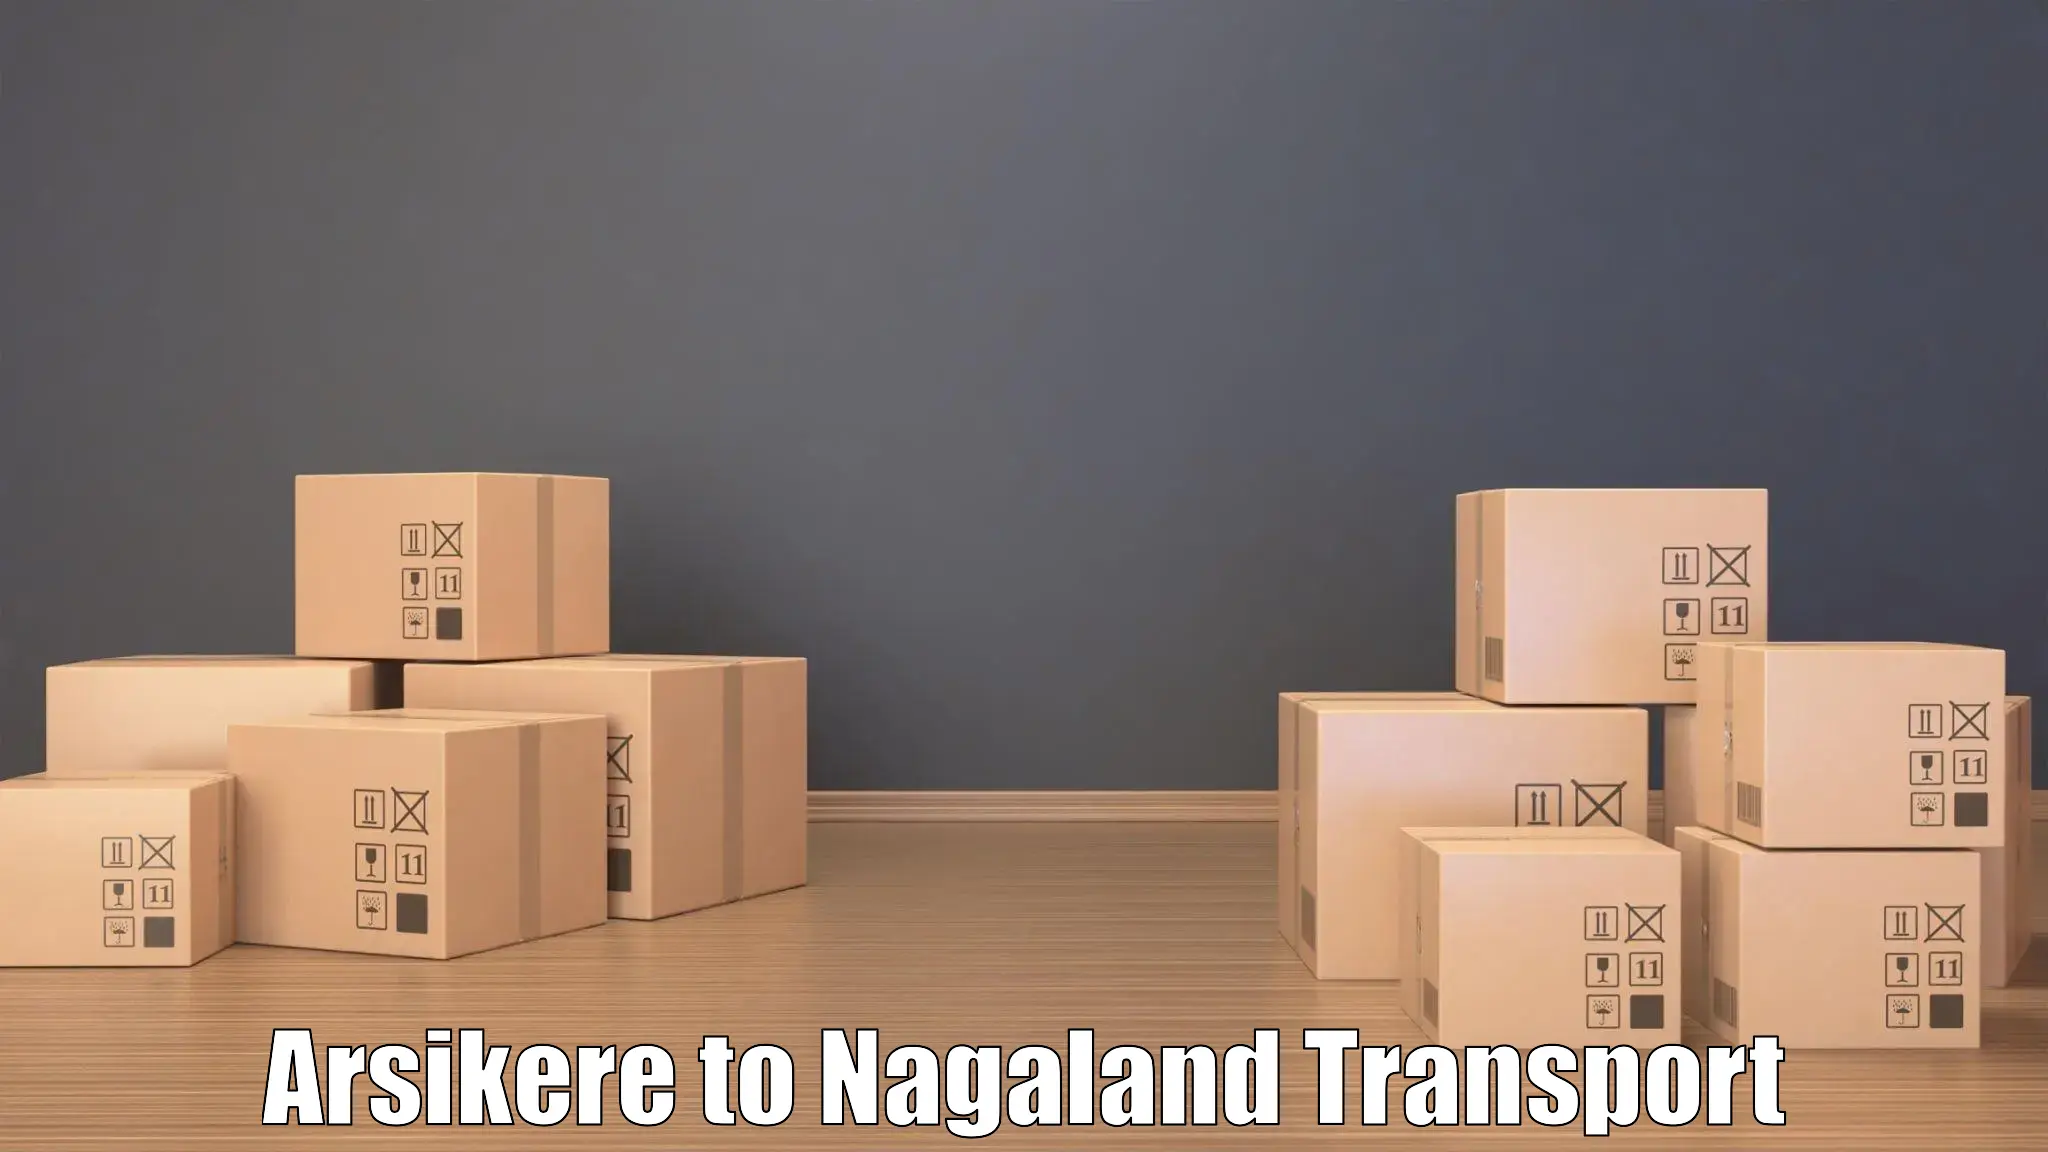 Road transport online services Arsikere to Nagaland